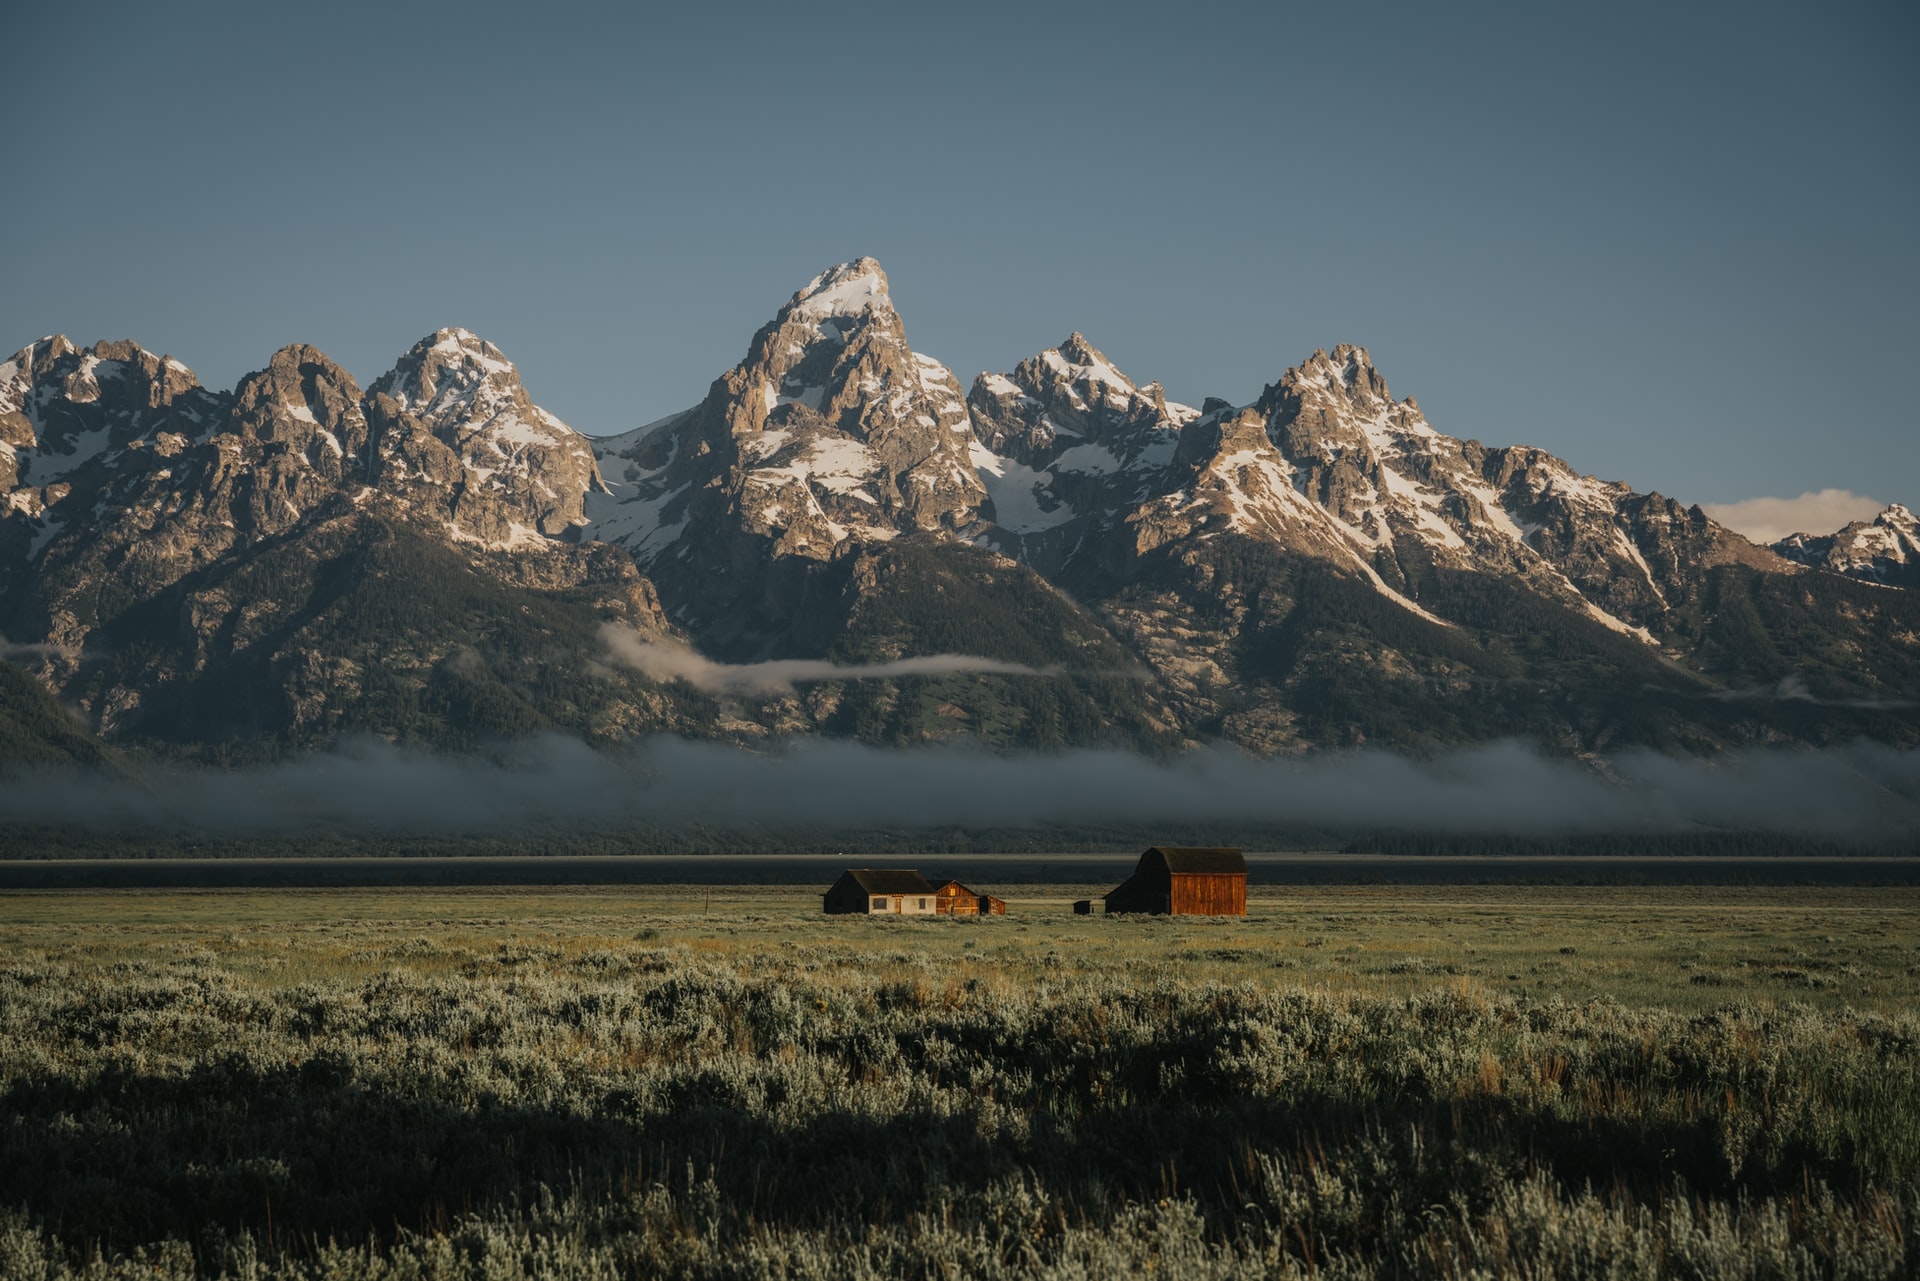 How to Register a Business in Wyoming